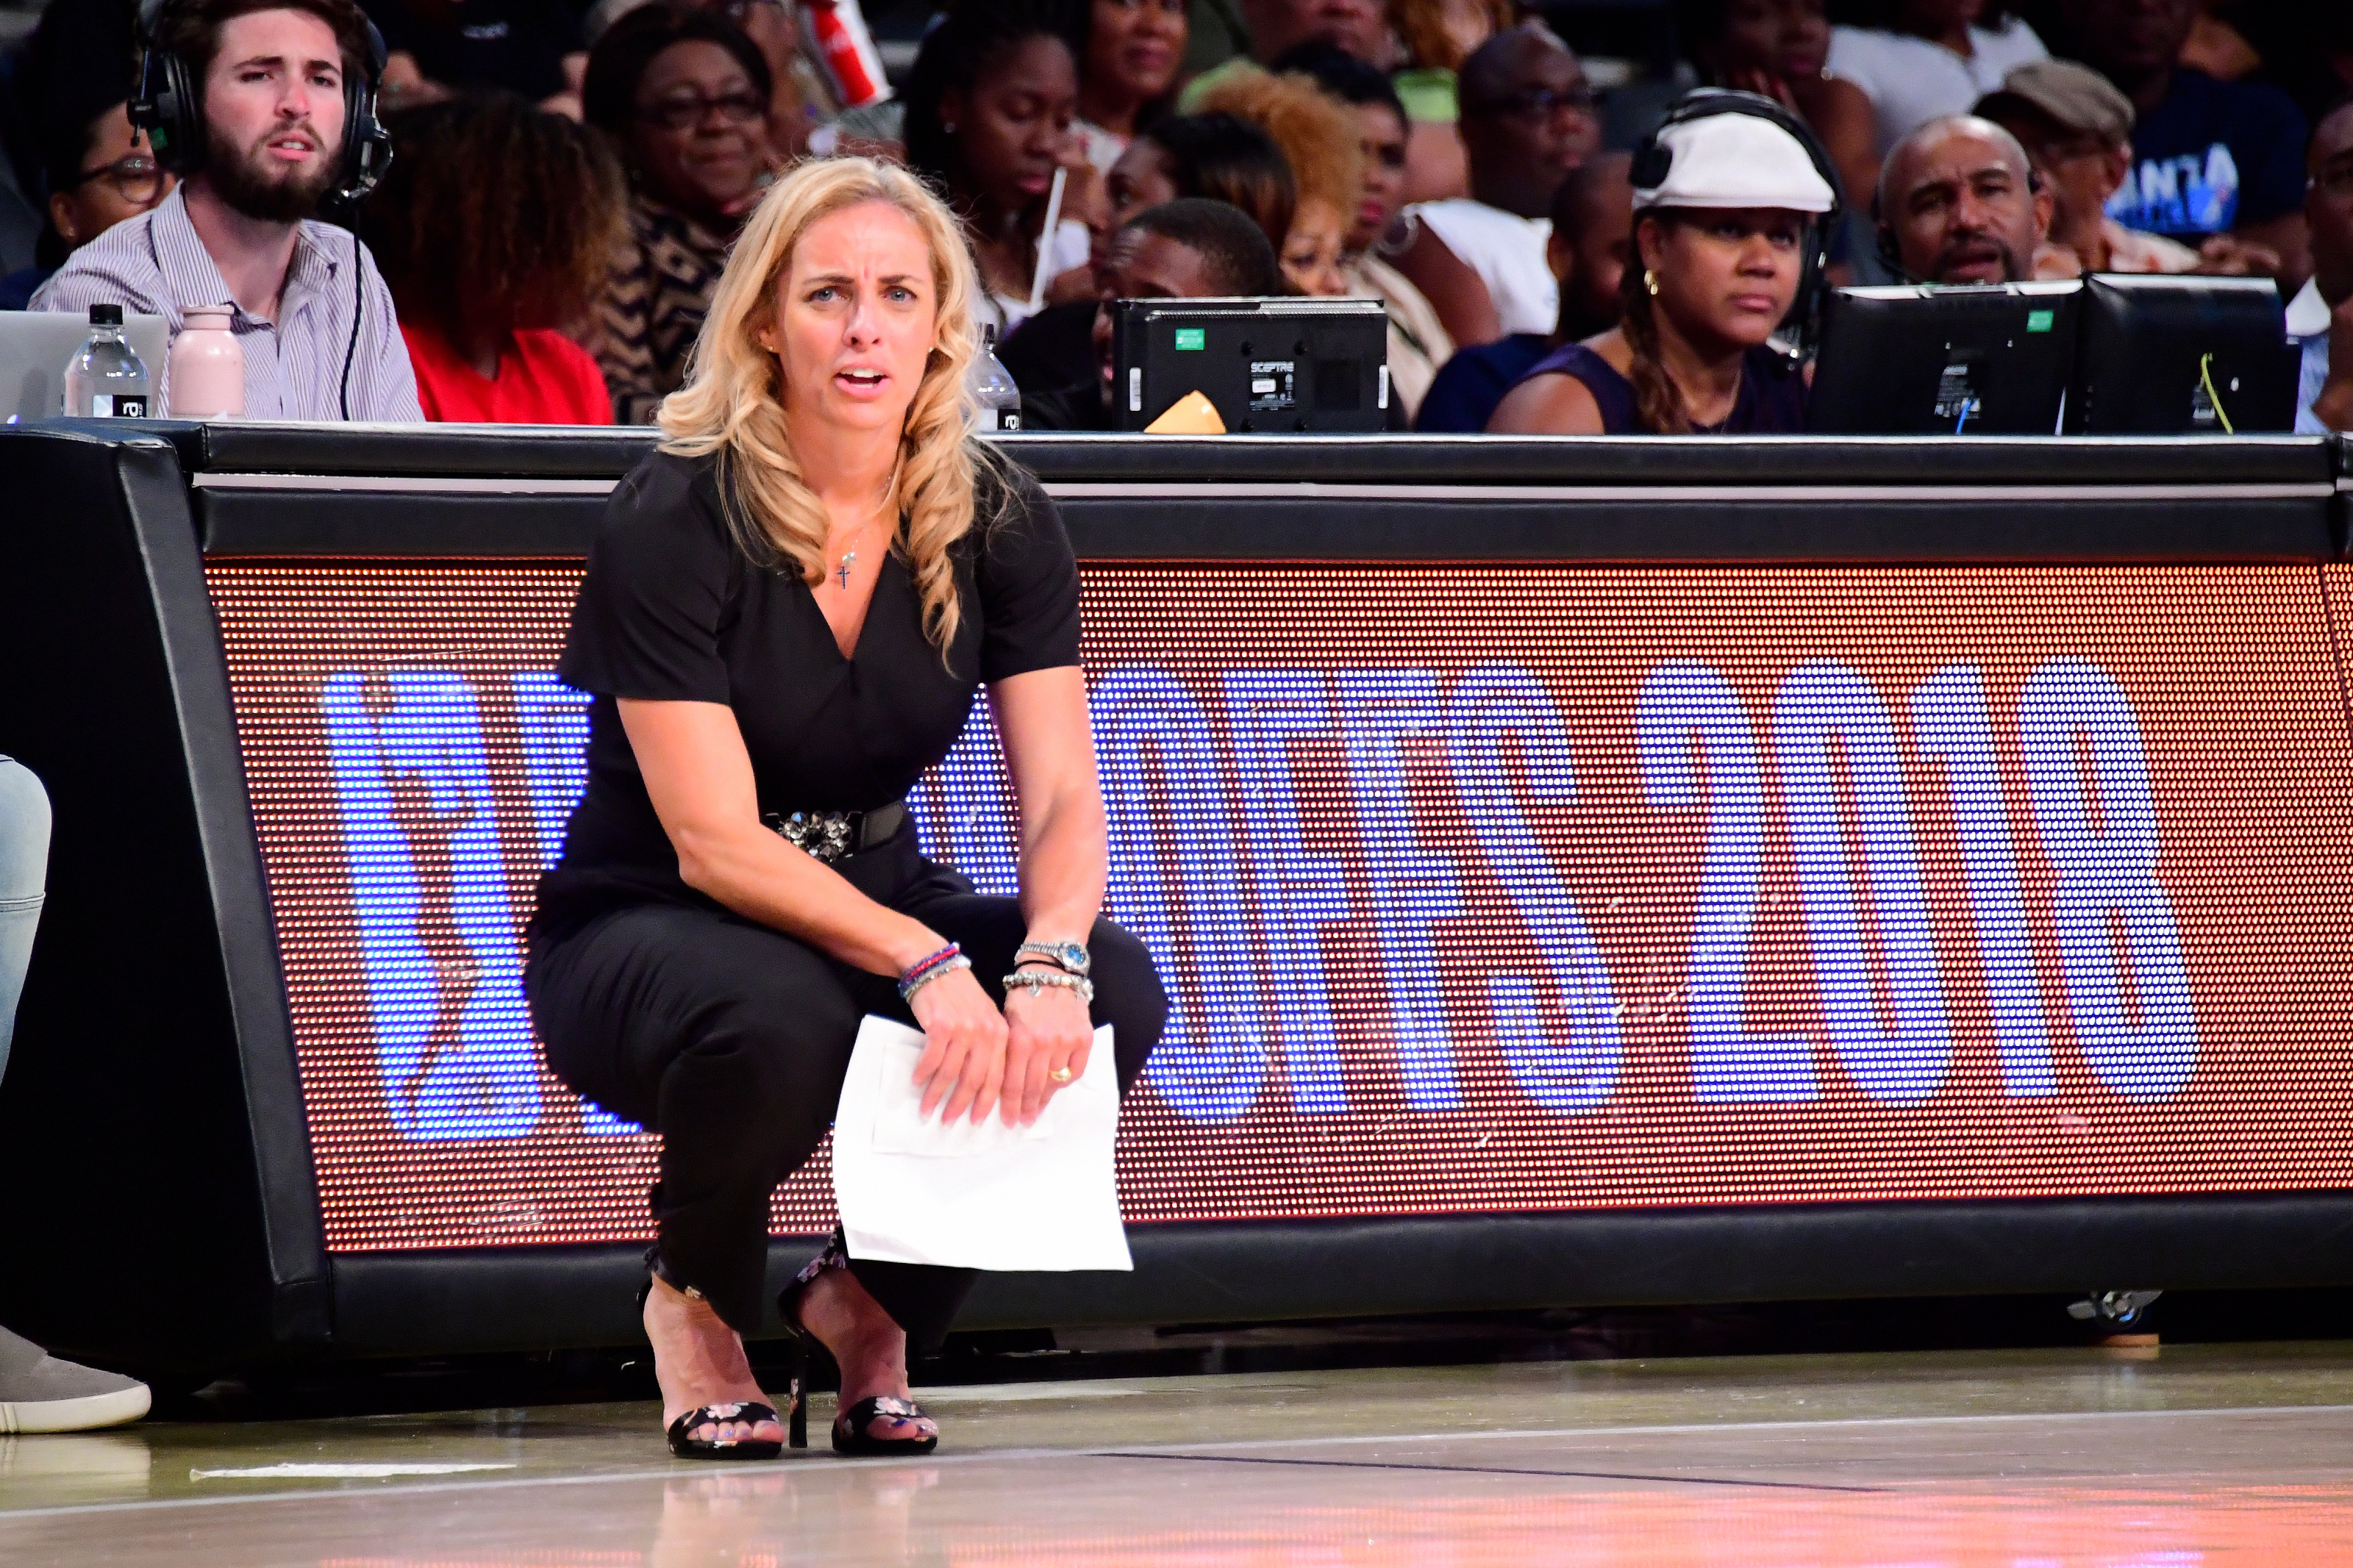 WNBA News: What's going on with the Atlanta Dream?